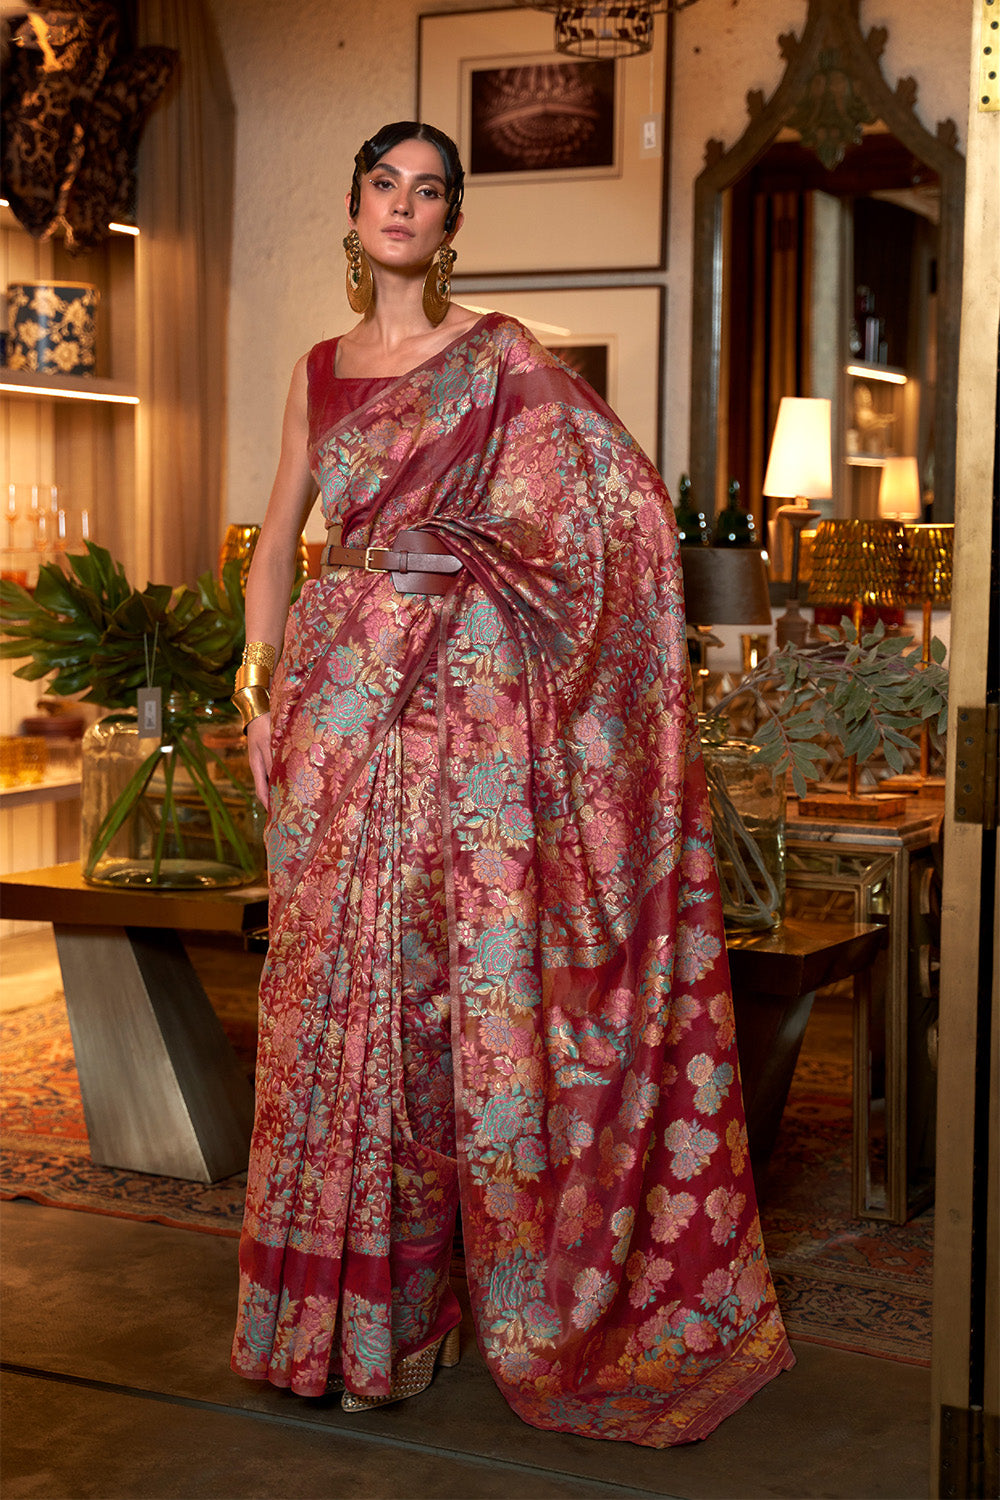 Garnet Red Woven Designer Kani Saree with Floral Weaving in Pallu and Border in Pure Modal Silk